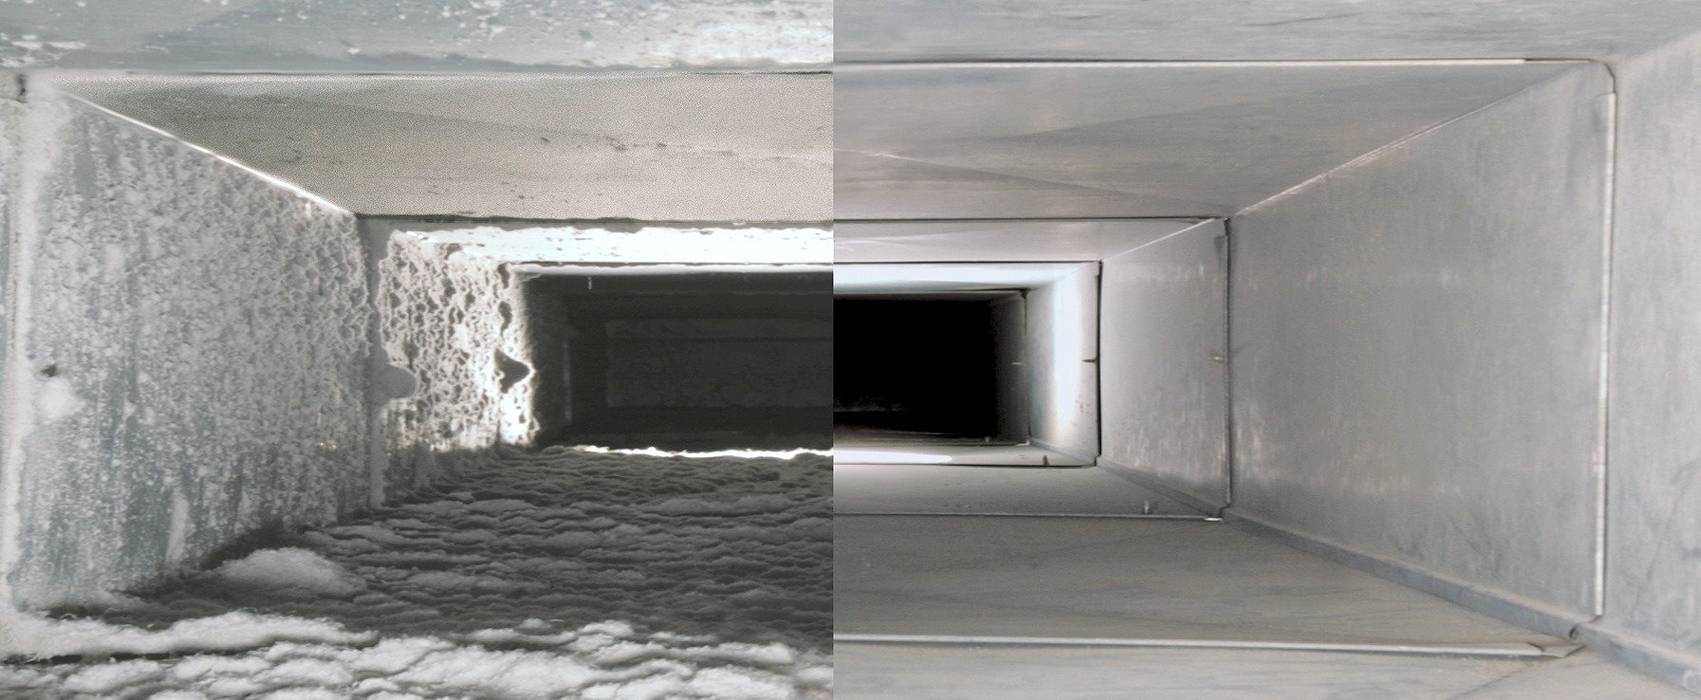 Air Duct Cleaning Air Conditioning Cape Town